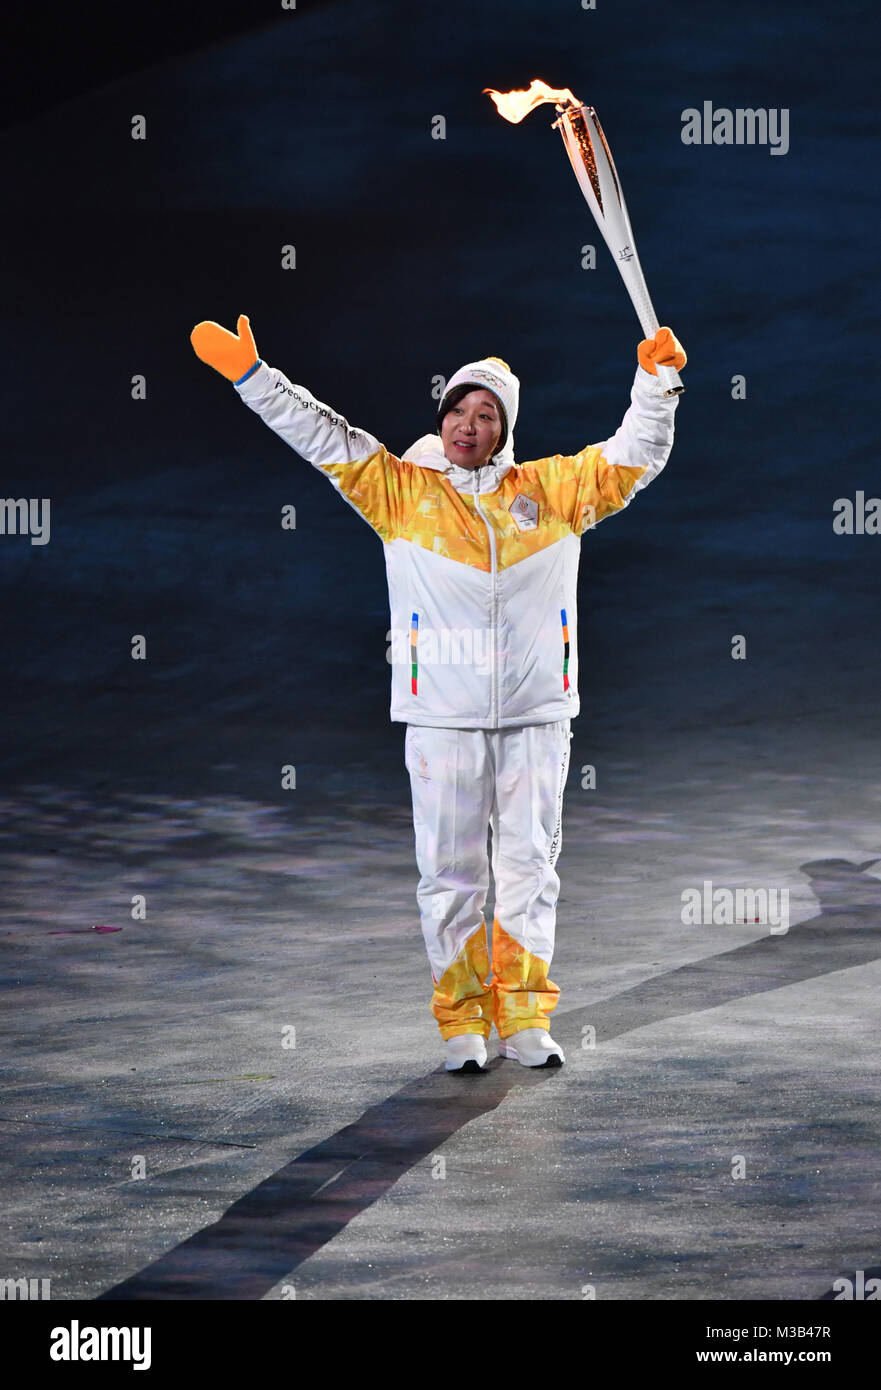 Pyeongchang, South Korea. 9th Feb, 2018. Jong Su Hyon from North Korea carries the Olympic flame into the stadium at the opening ceremony of the Winter Olympics in Pyeongchang, South Korea, 9 February 2018. Credit: Peter Kneffel/dpa/Alamy Live News Stock Photo